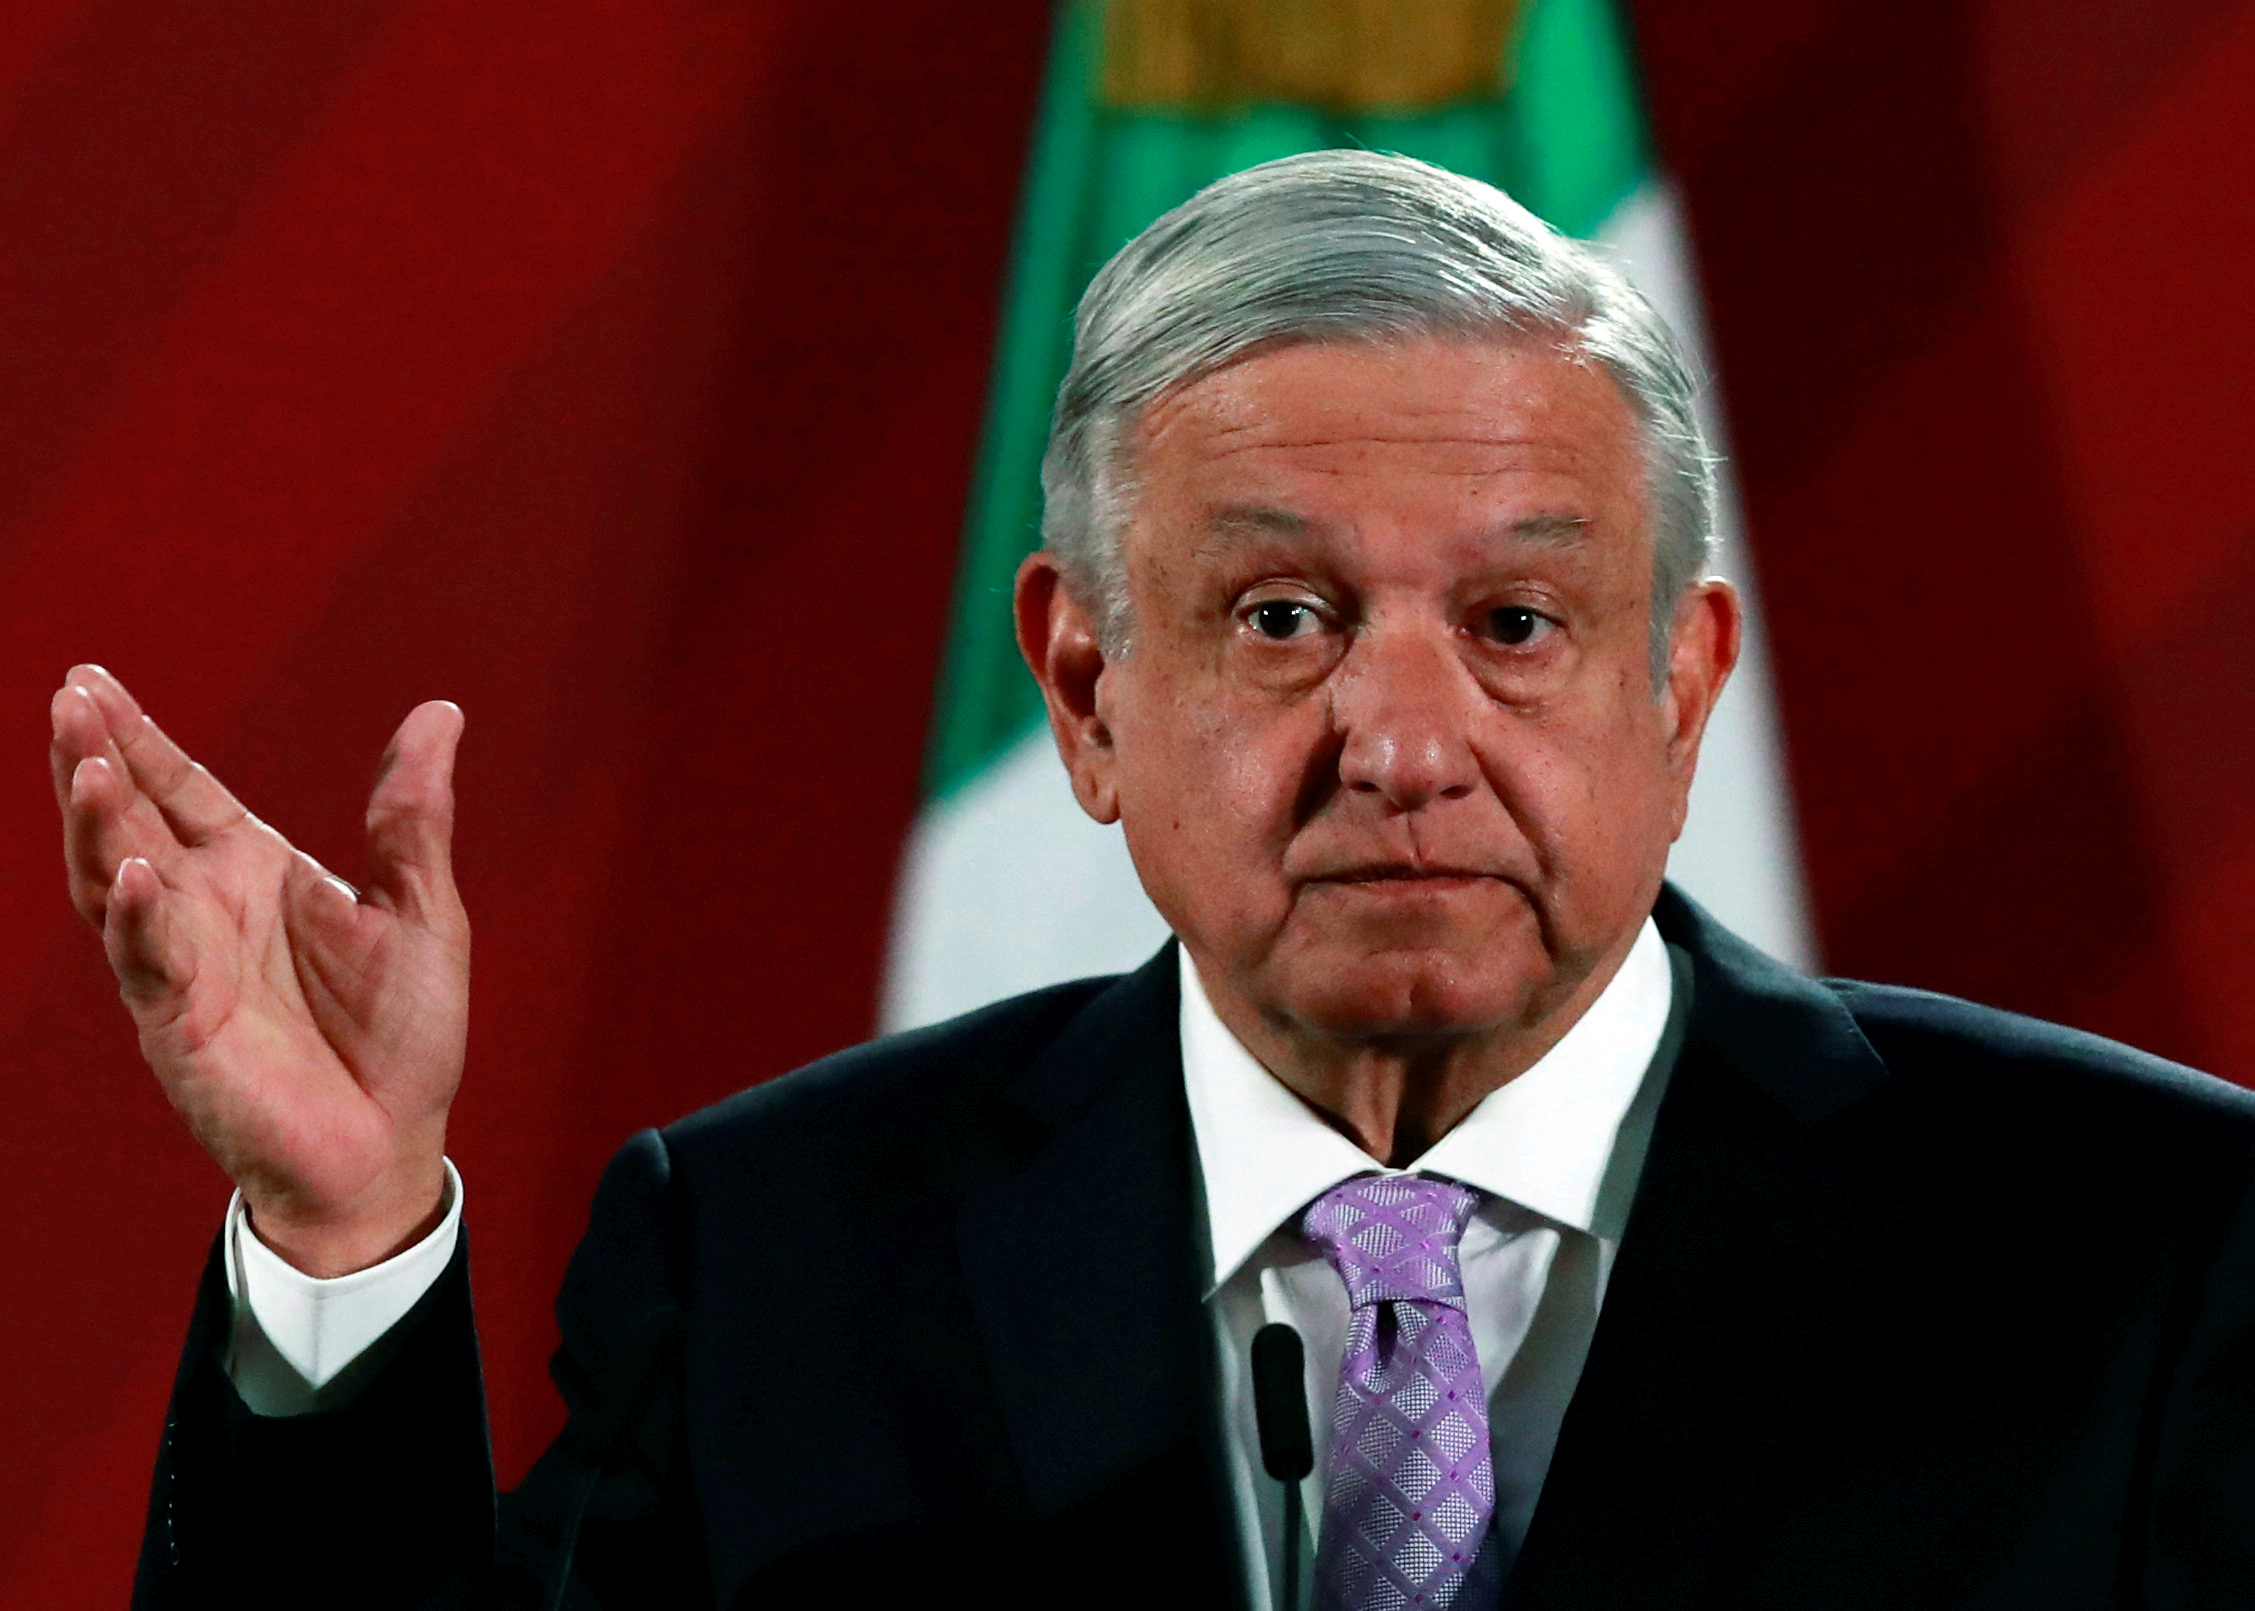 FILE PHOTO: Mexico's President Andres Manuel Lopez Obrador attends a news conference at the National Palace in Mexico City, Mexico February 18, 2020. REUTERS/Henry Romero/File Photo